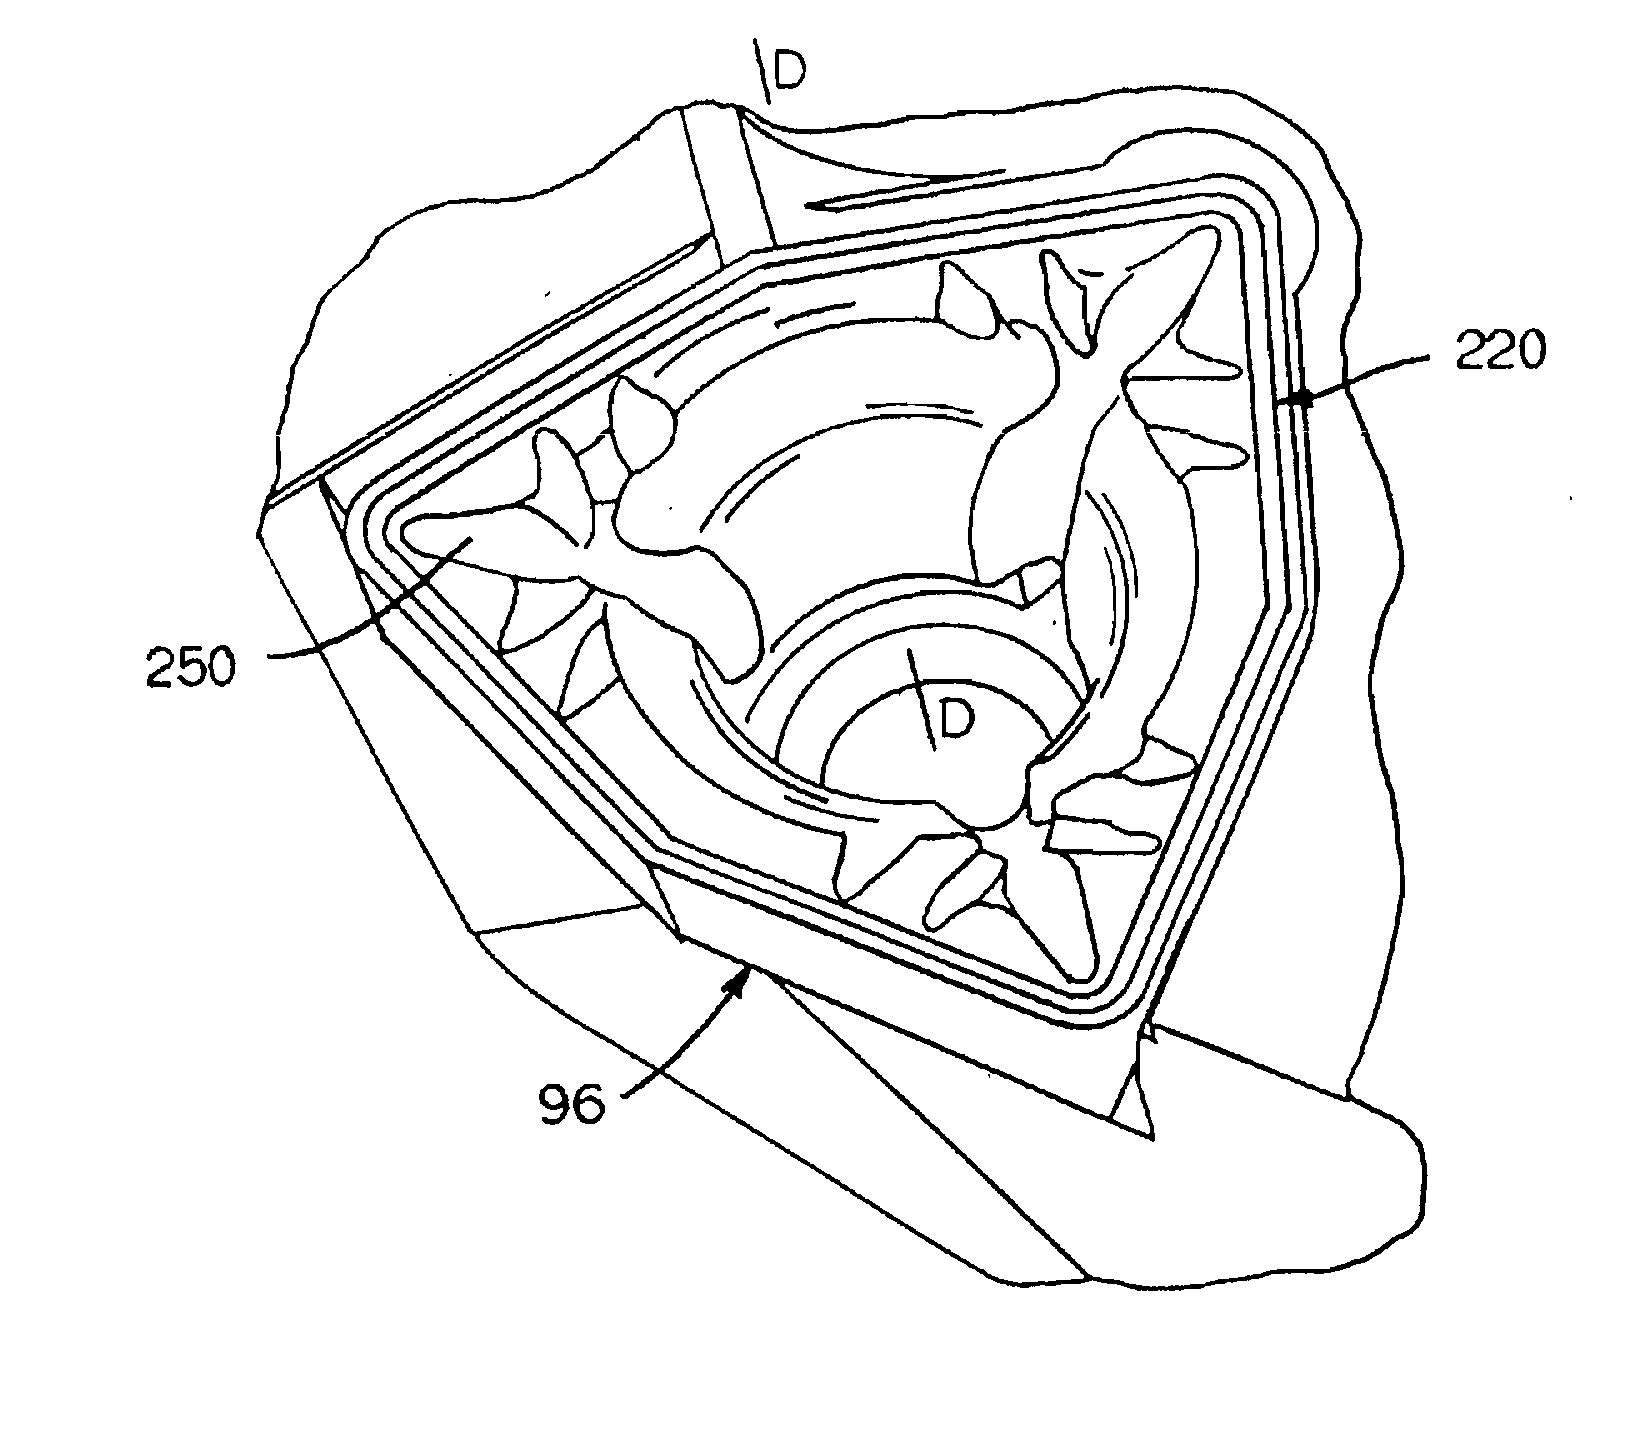 Indexable cutting insert with coolant delivery